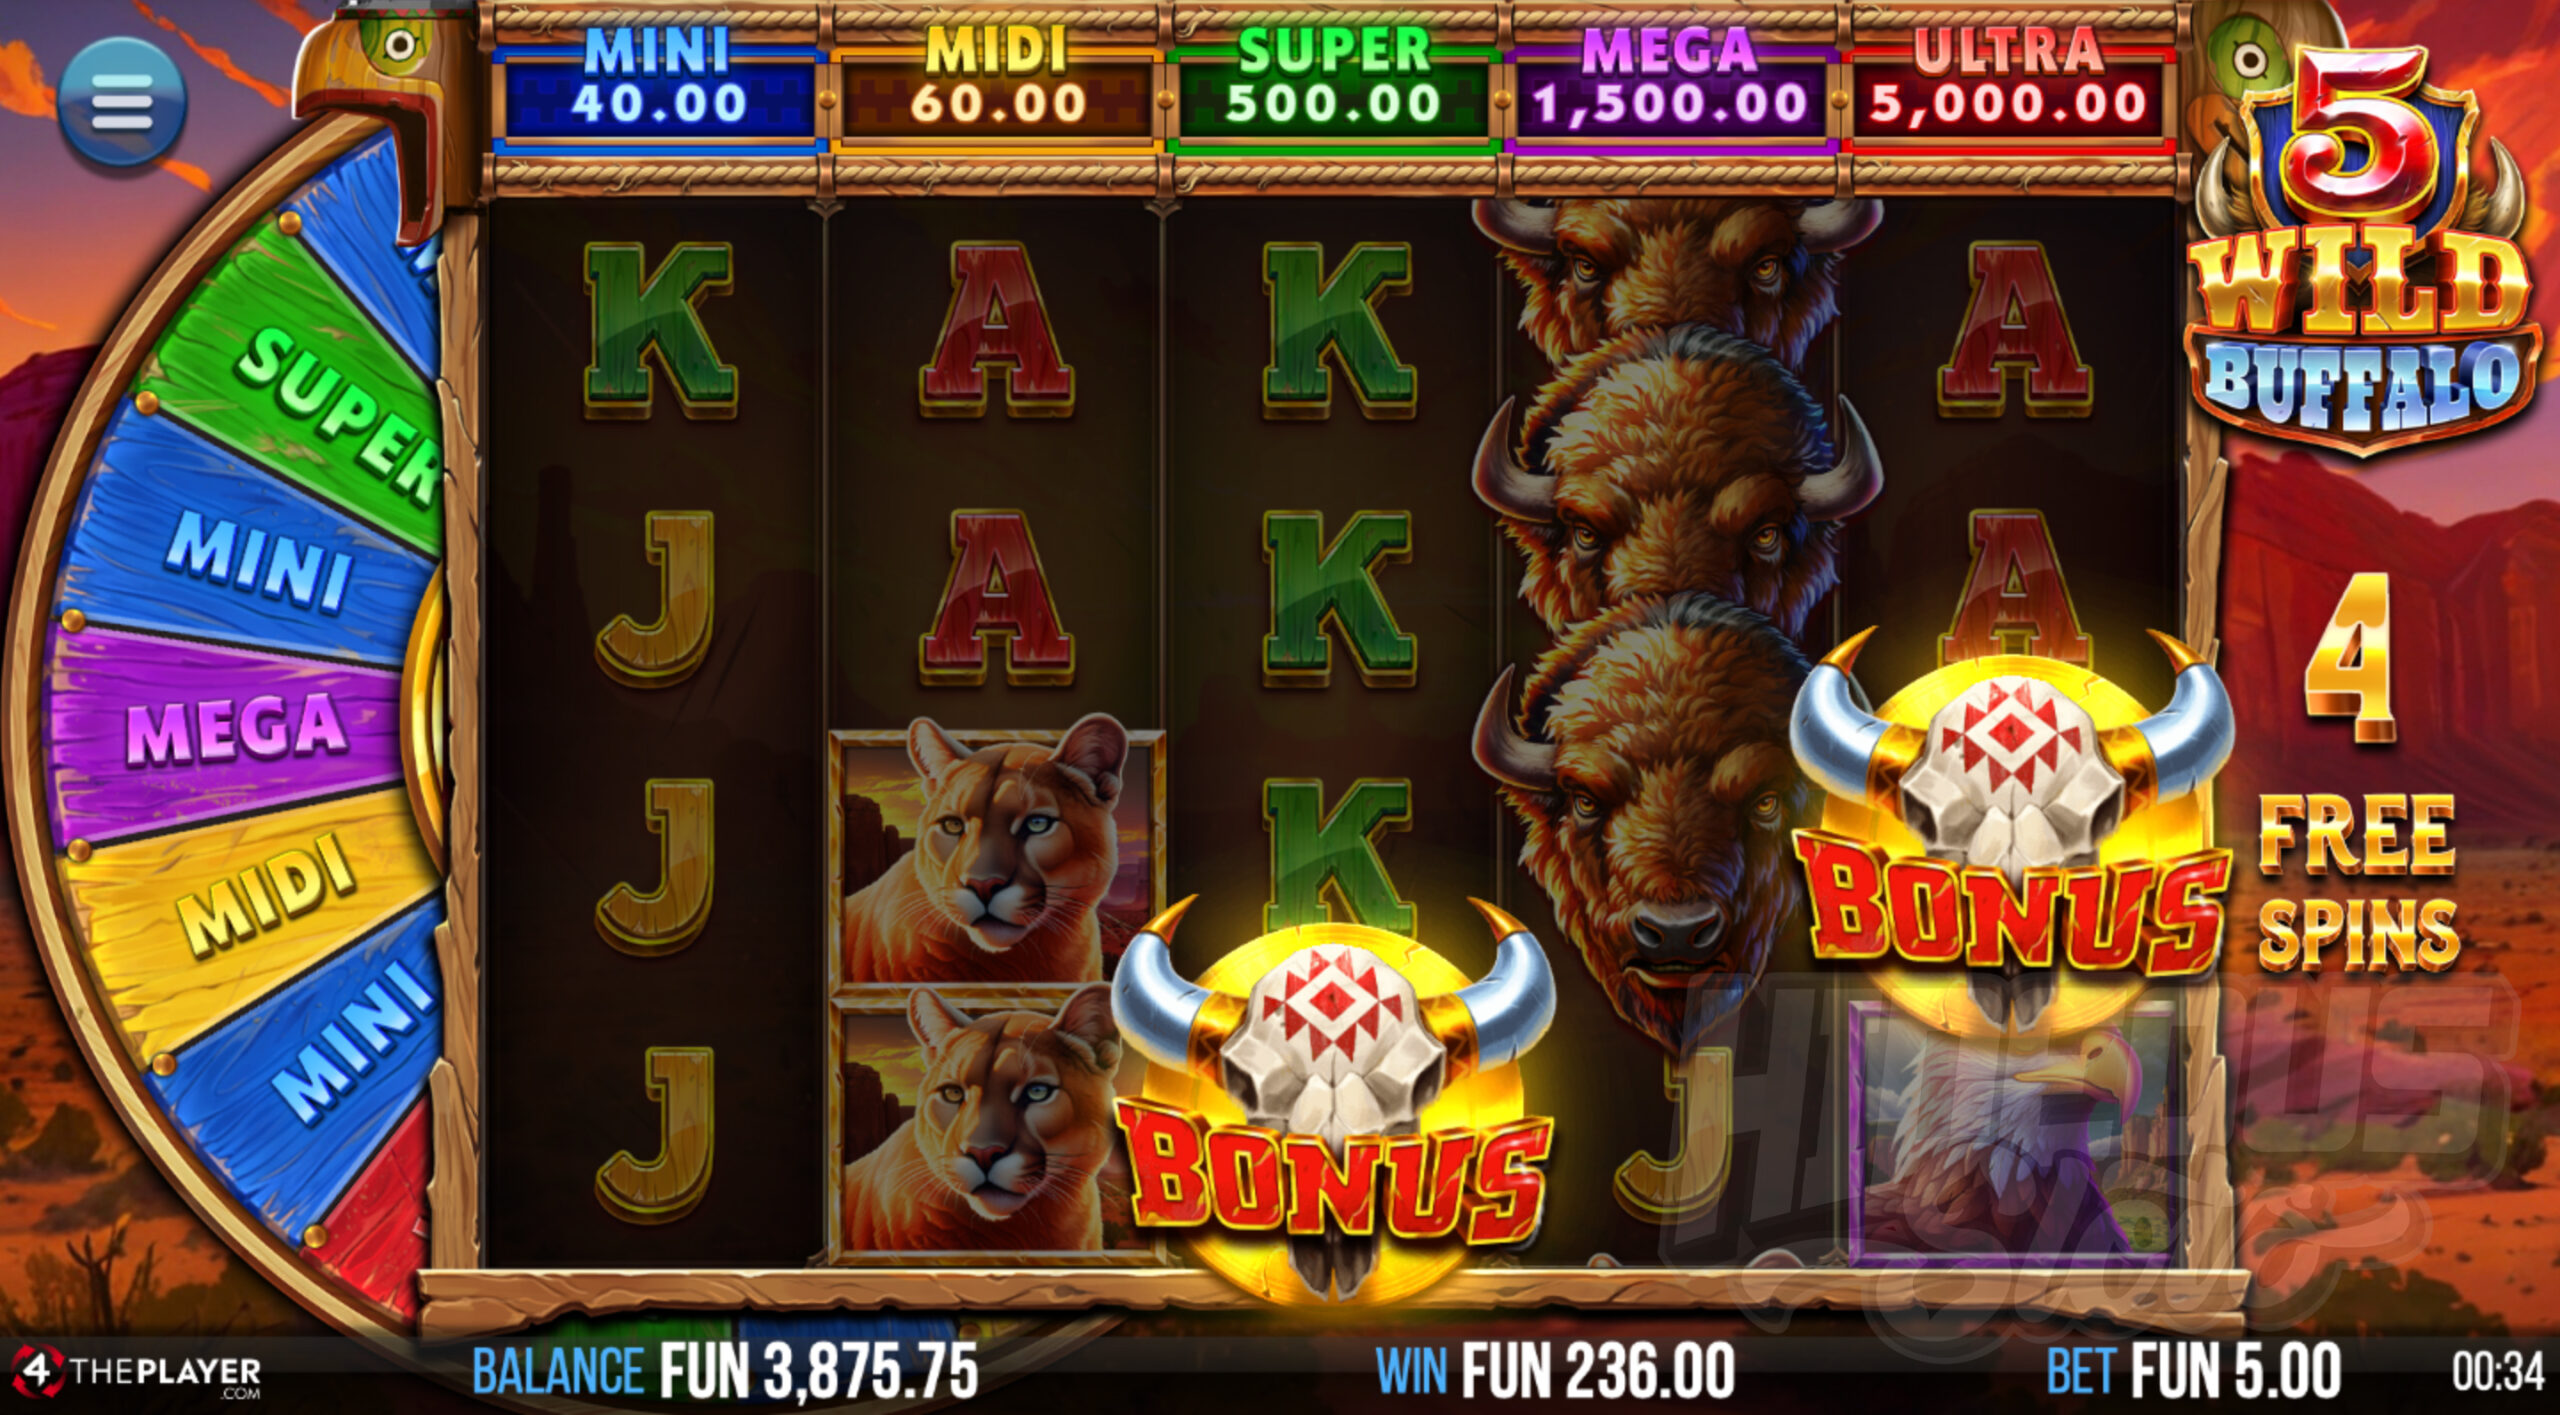 Land 2 or More Bonus Scatters During Free Spins to Retrigger the Feature